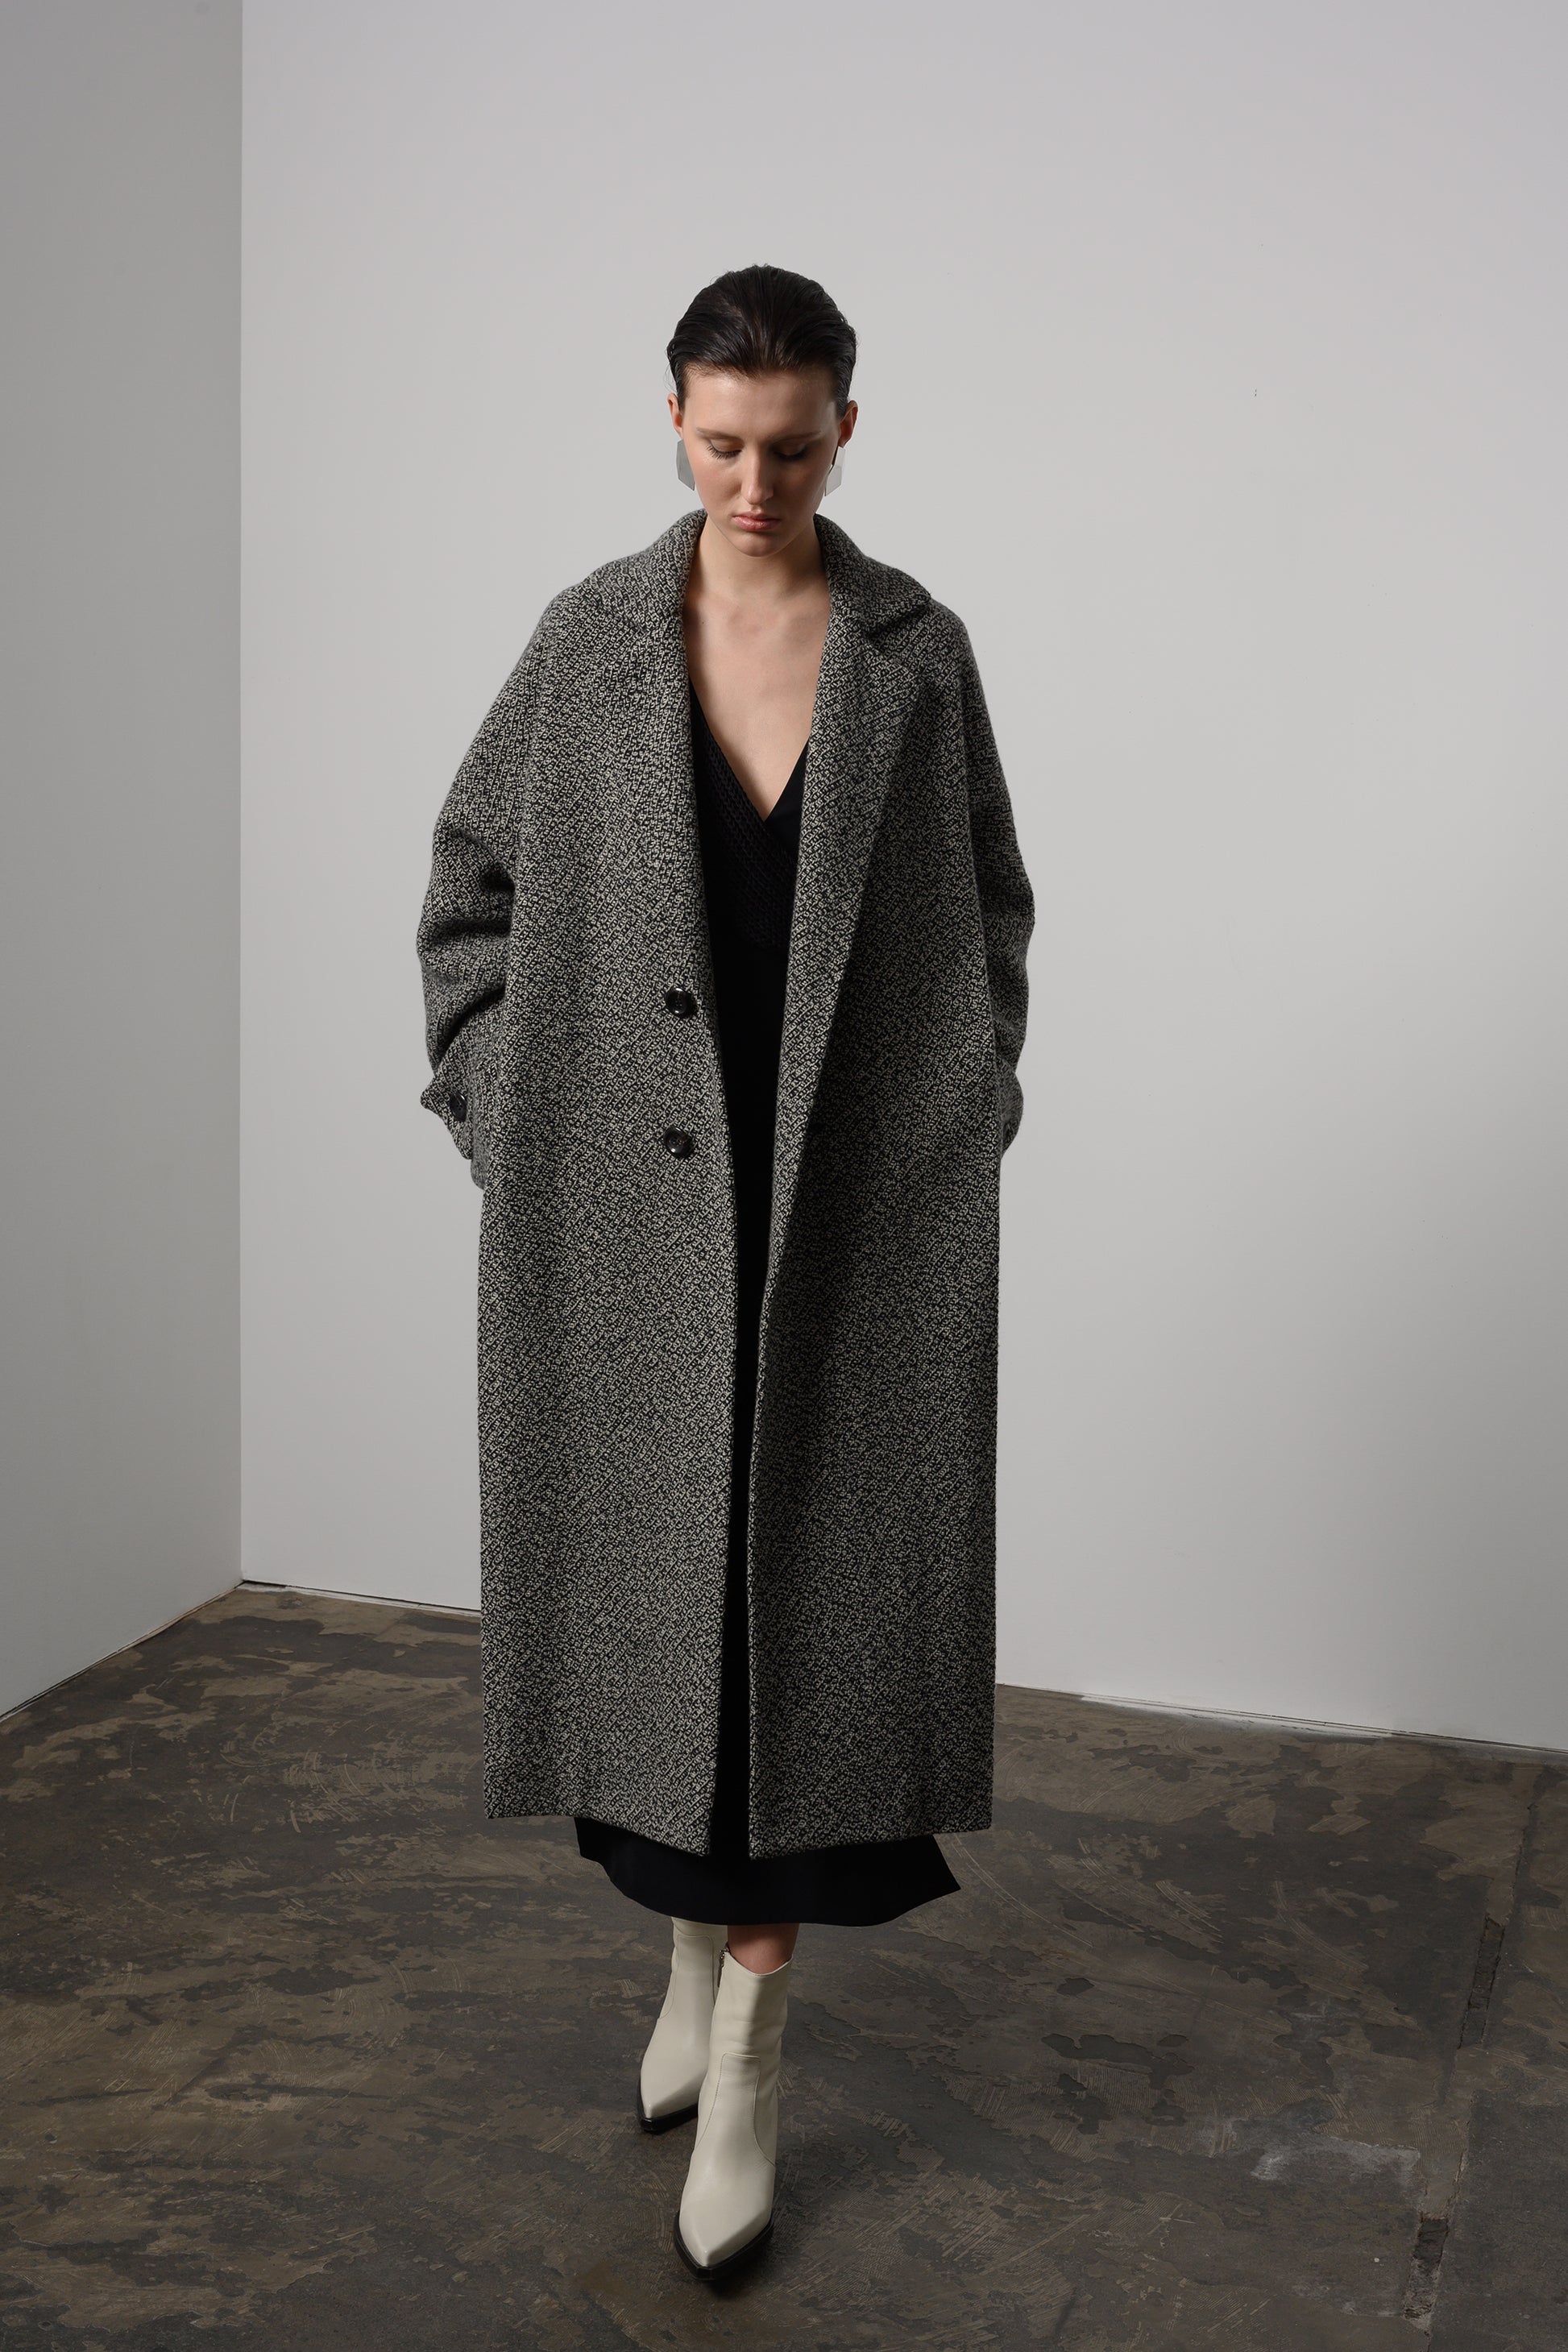 Stylish long kinono coat with a black and white woollen fabric, featuring a notched collar, single-button front closure, and soft shoulders for a sophisticated, timeless look